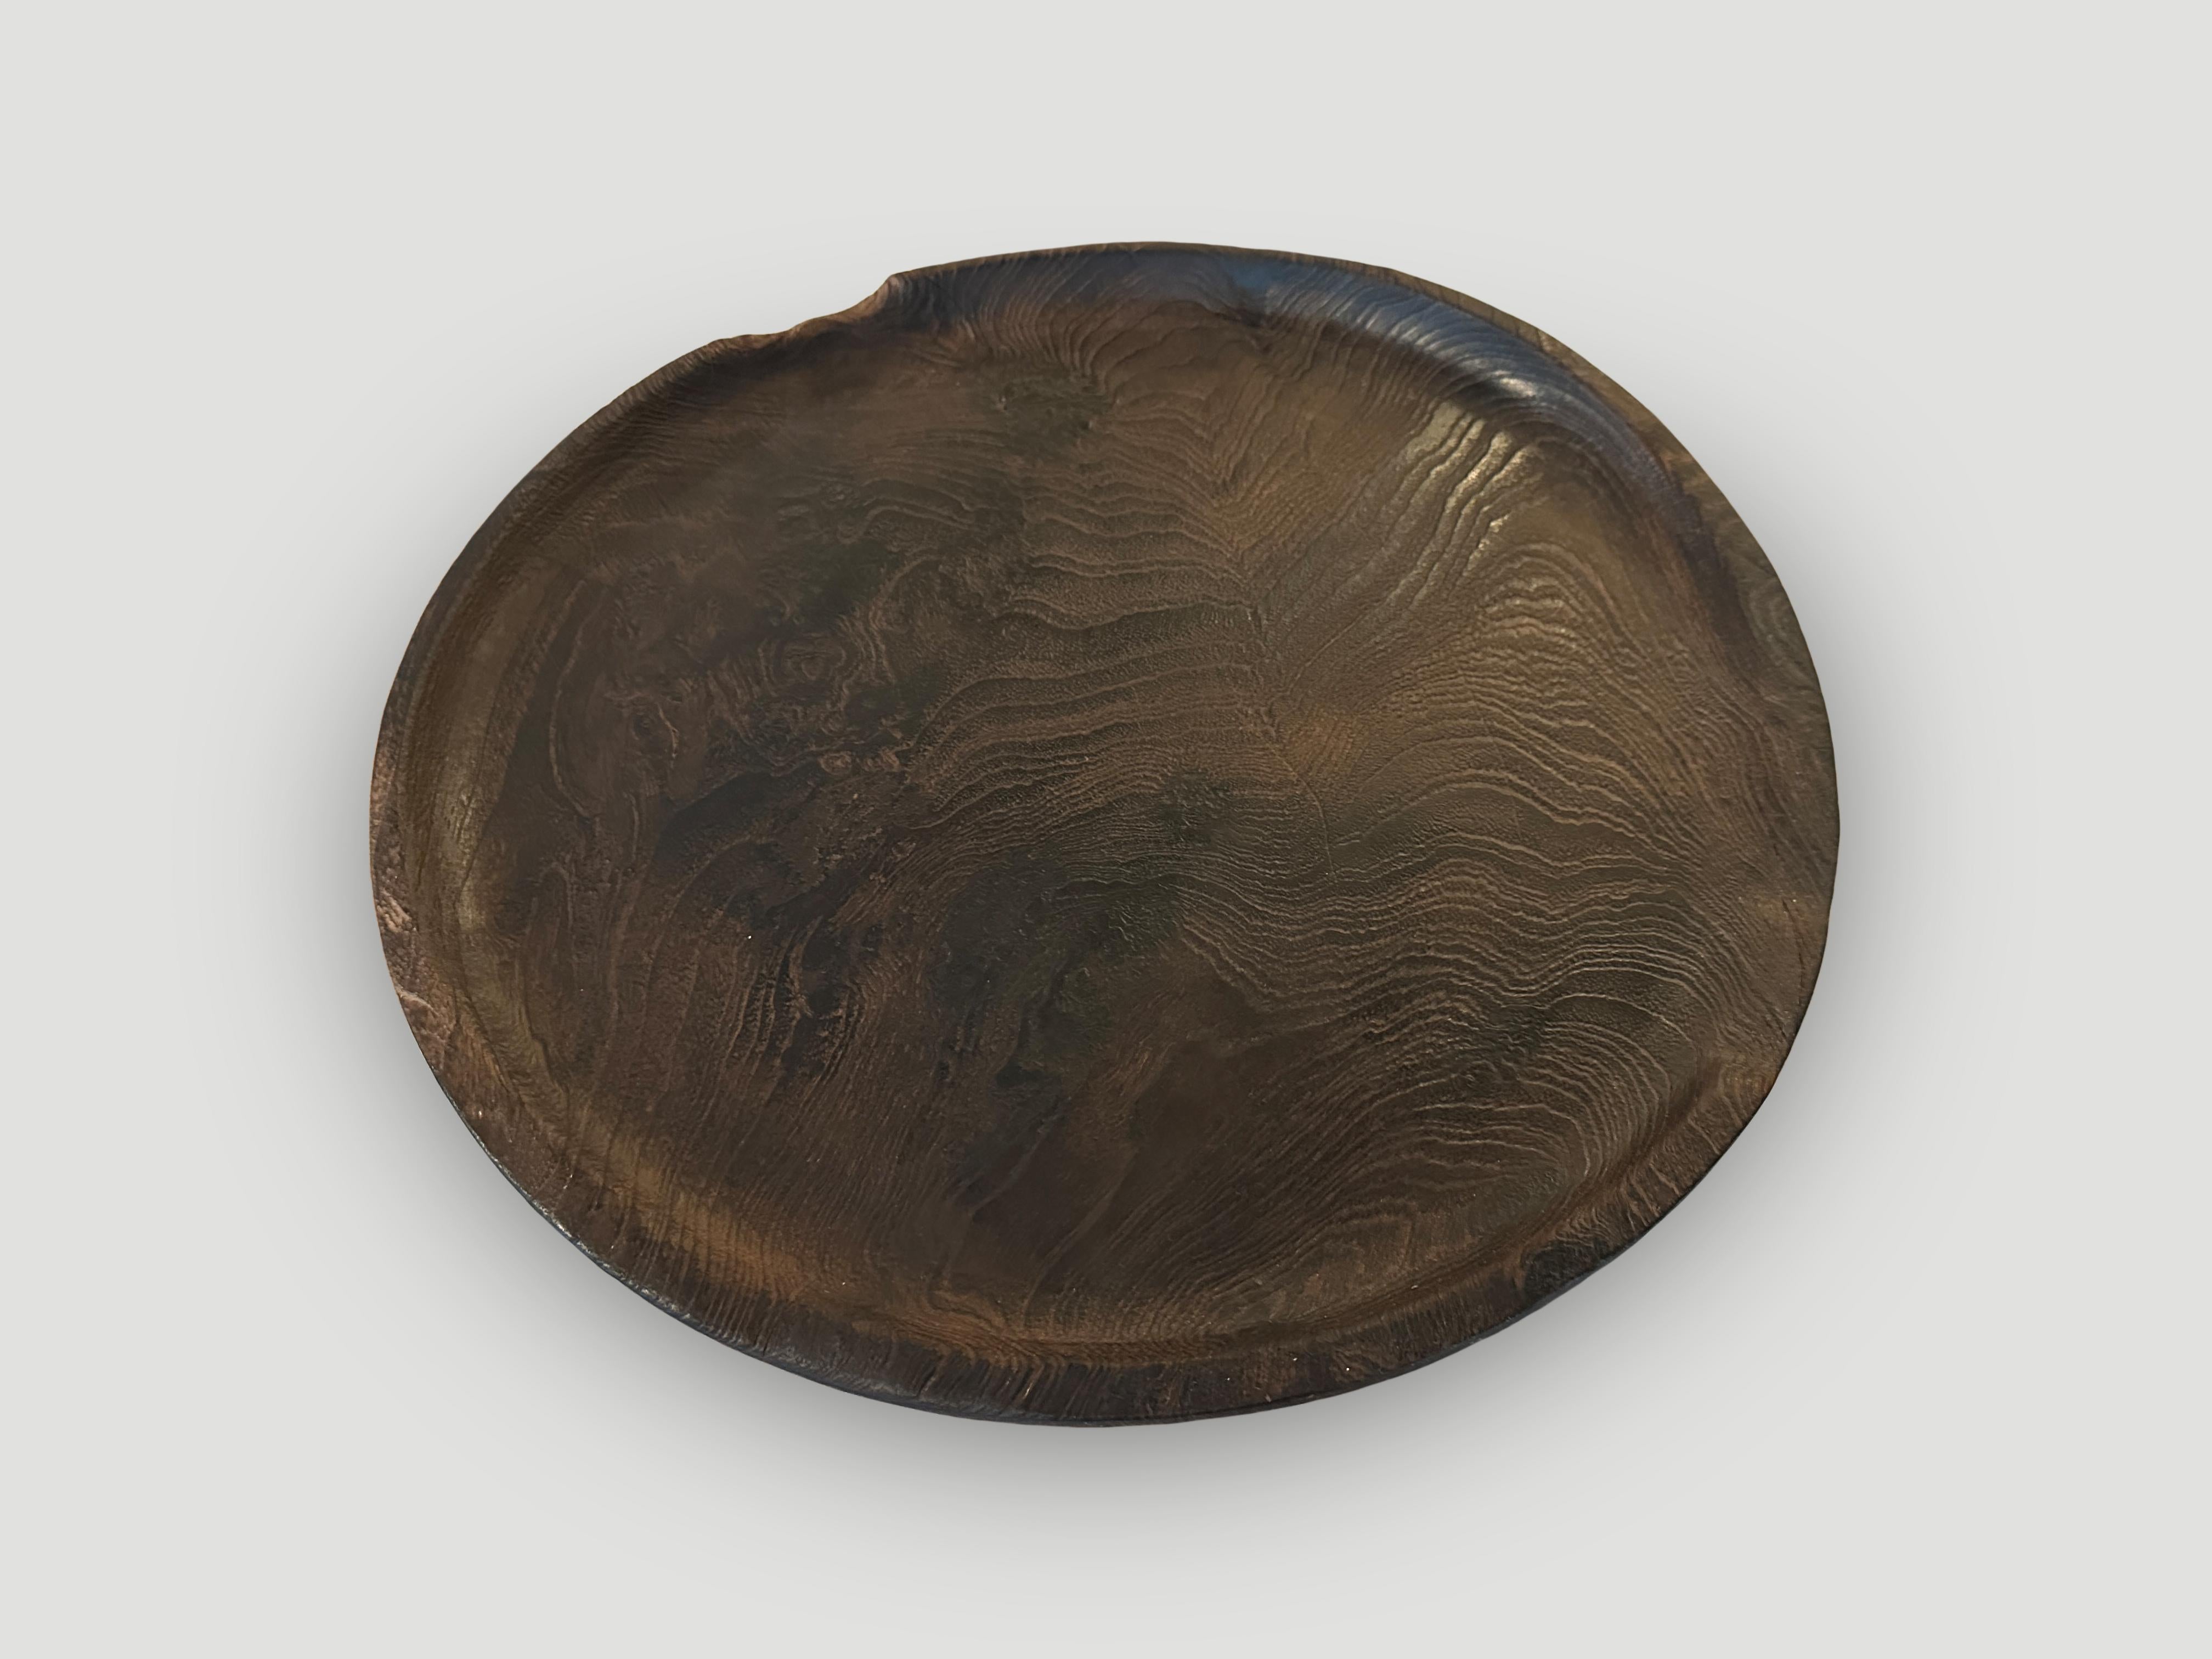 Beautiful wood grain in this minimalist shallow platter. This platter was hand made from a single piece of teak wood in the spirit of Wabi-Sabi, a Japanese philosophy that beauty can be found in imperfection and impermanence. It is a beauty of